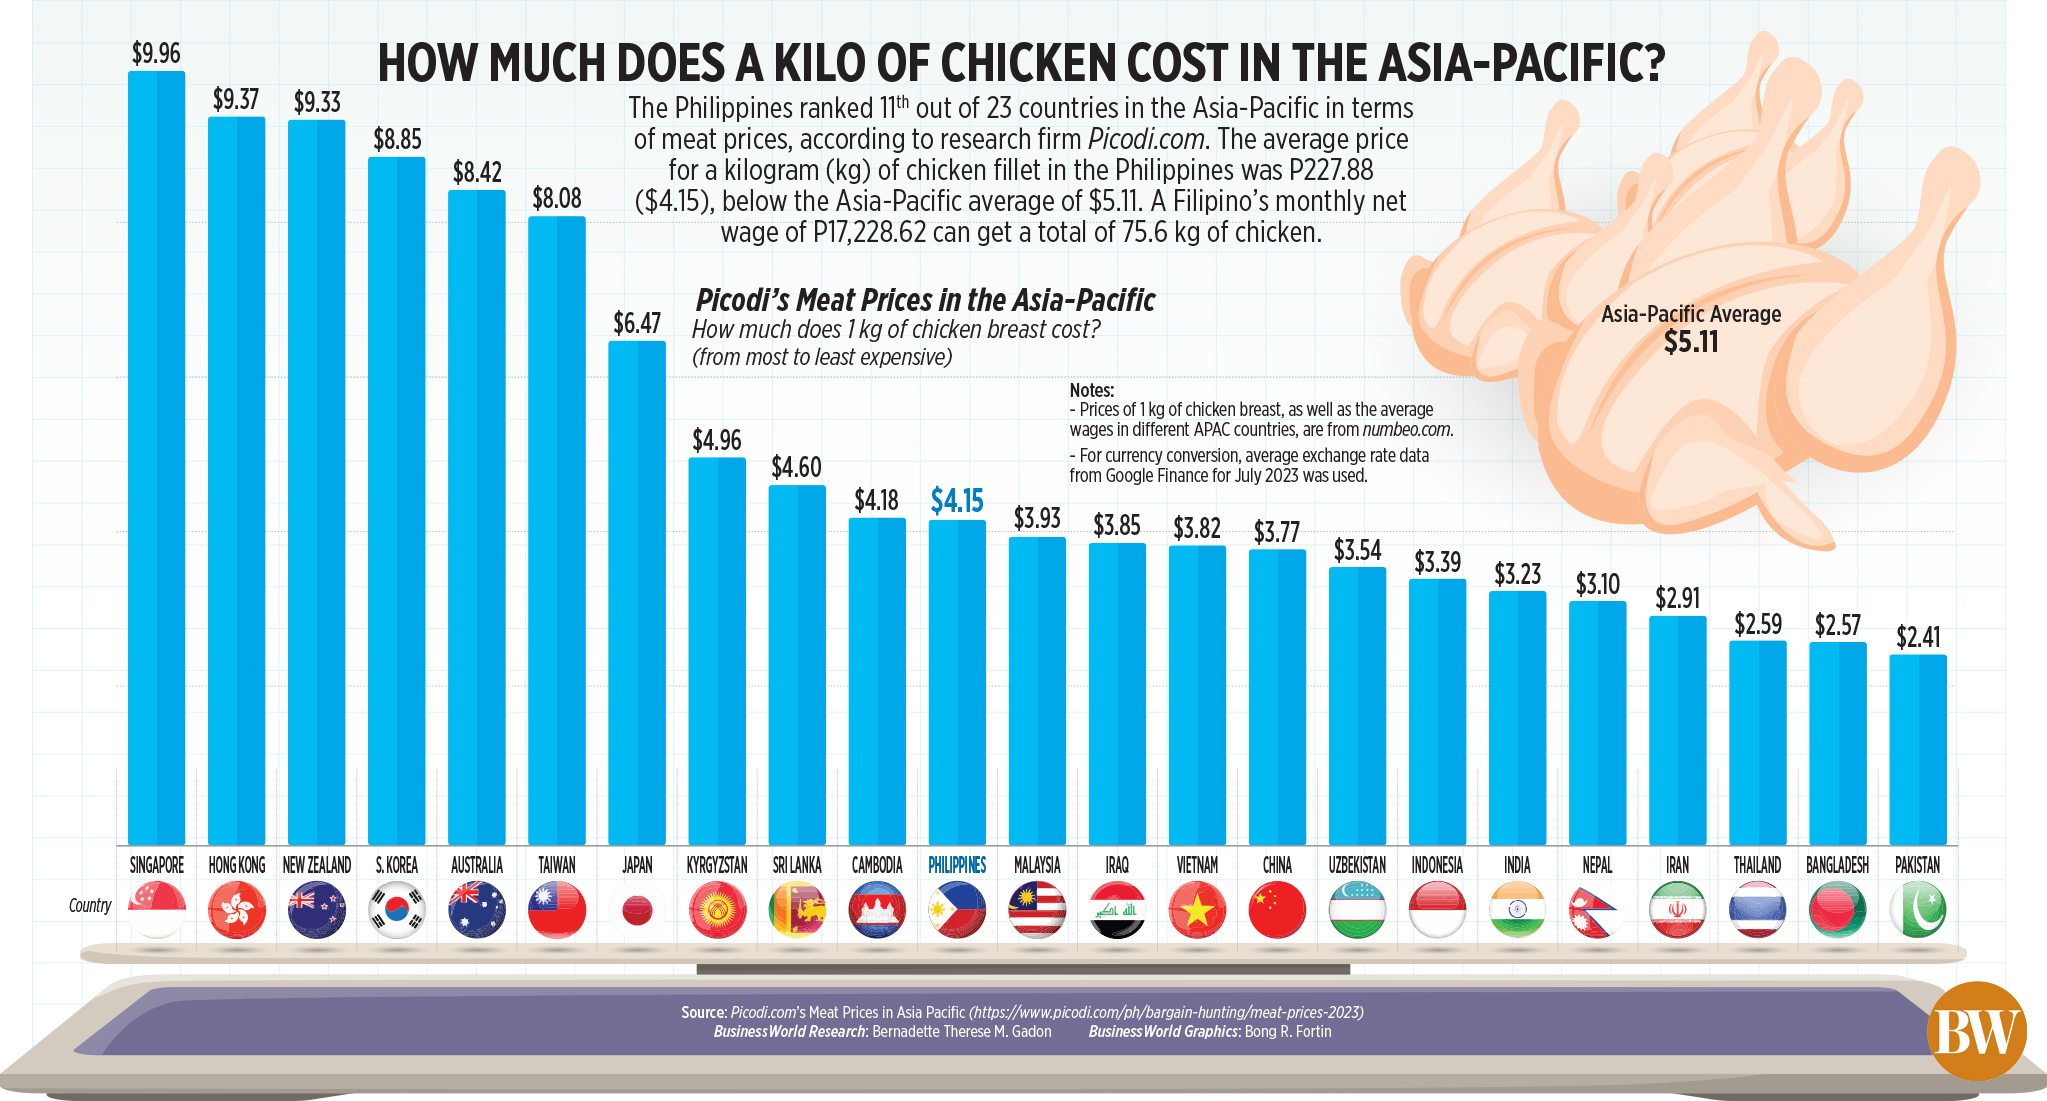 How much does a kilo of chicken cost in the Asia-Pacific?